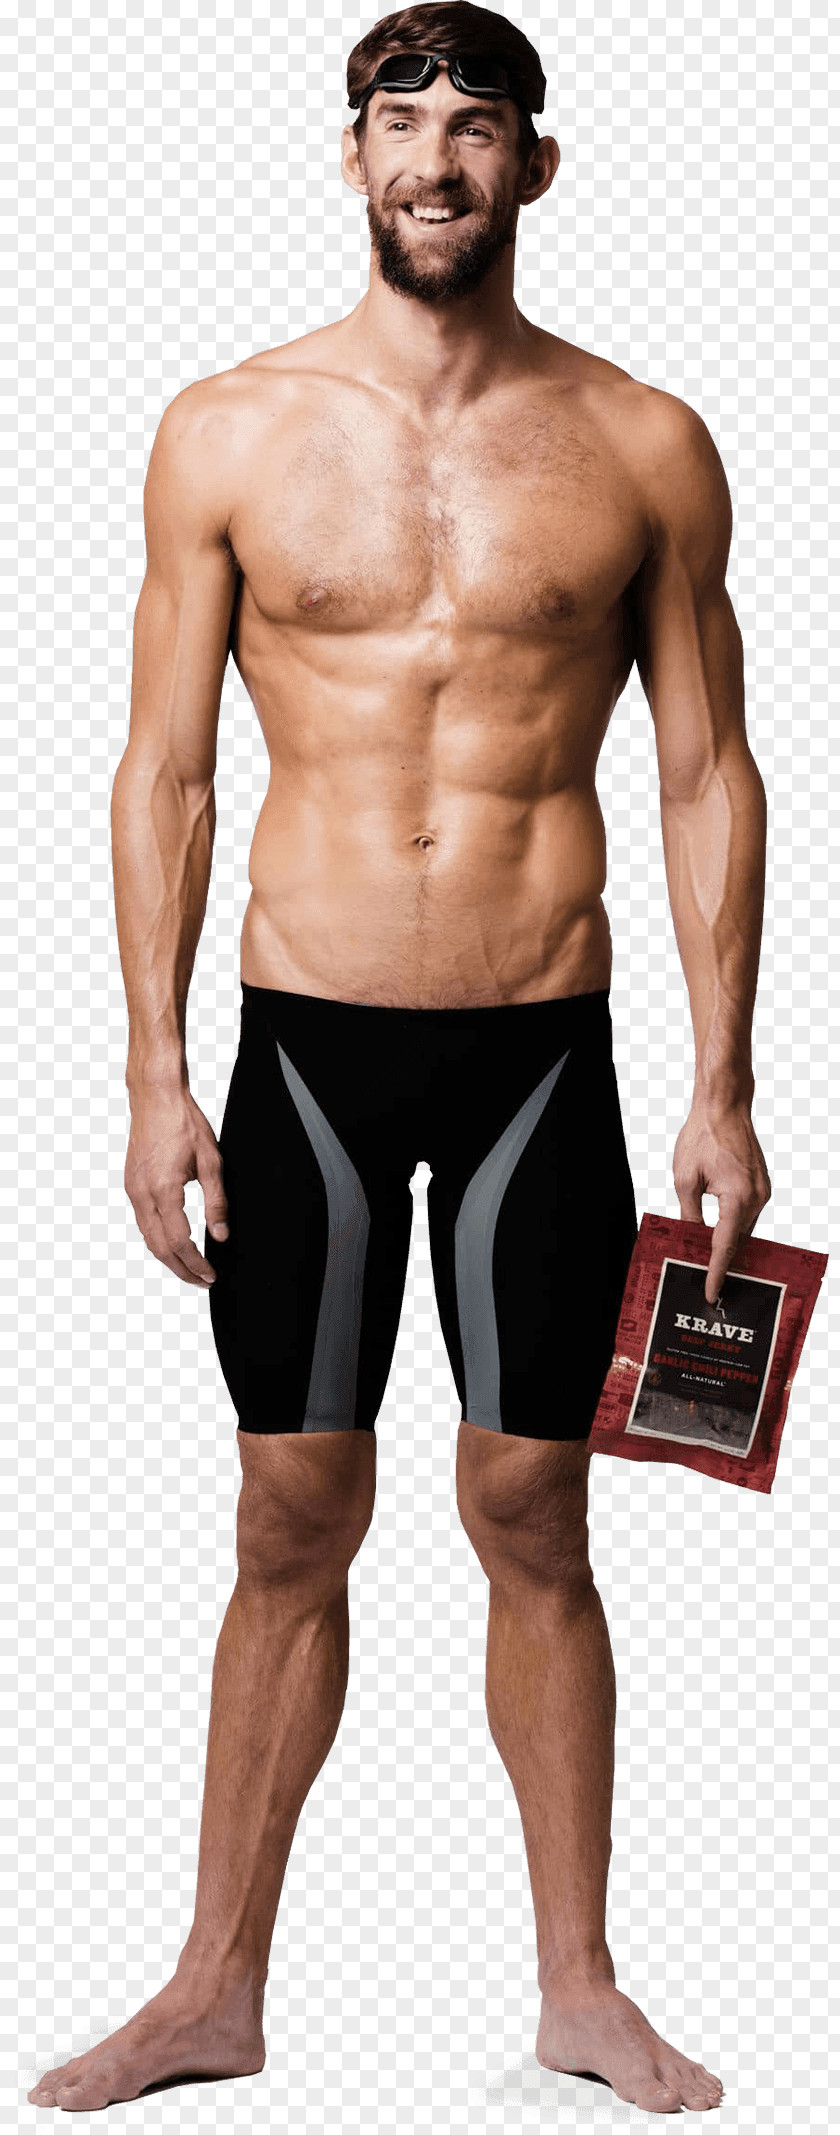 Jerky Michael Phelps United States Athlete Krave Male PNG